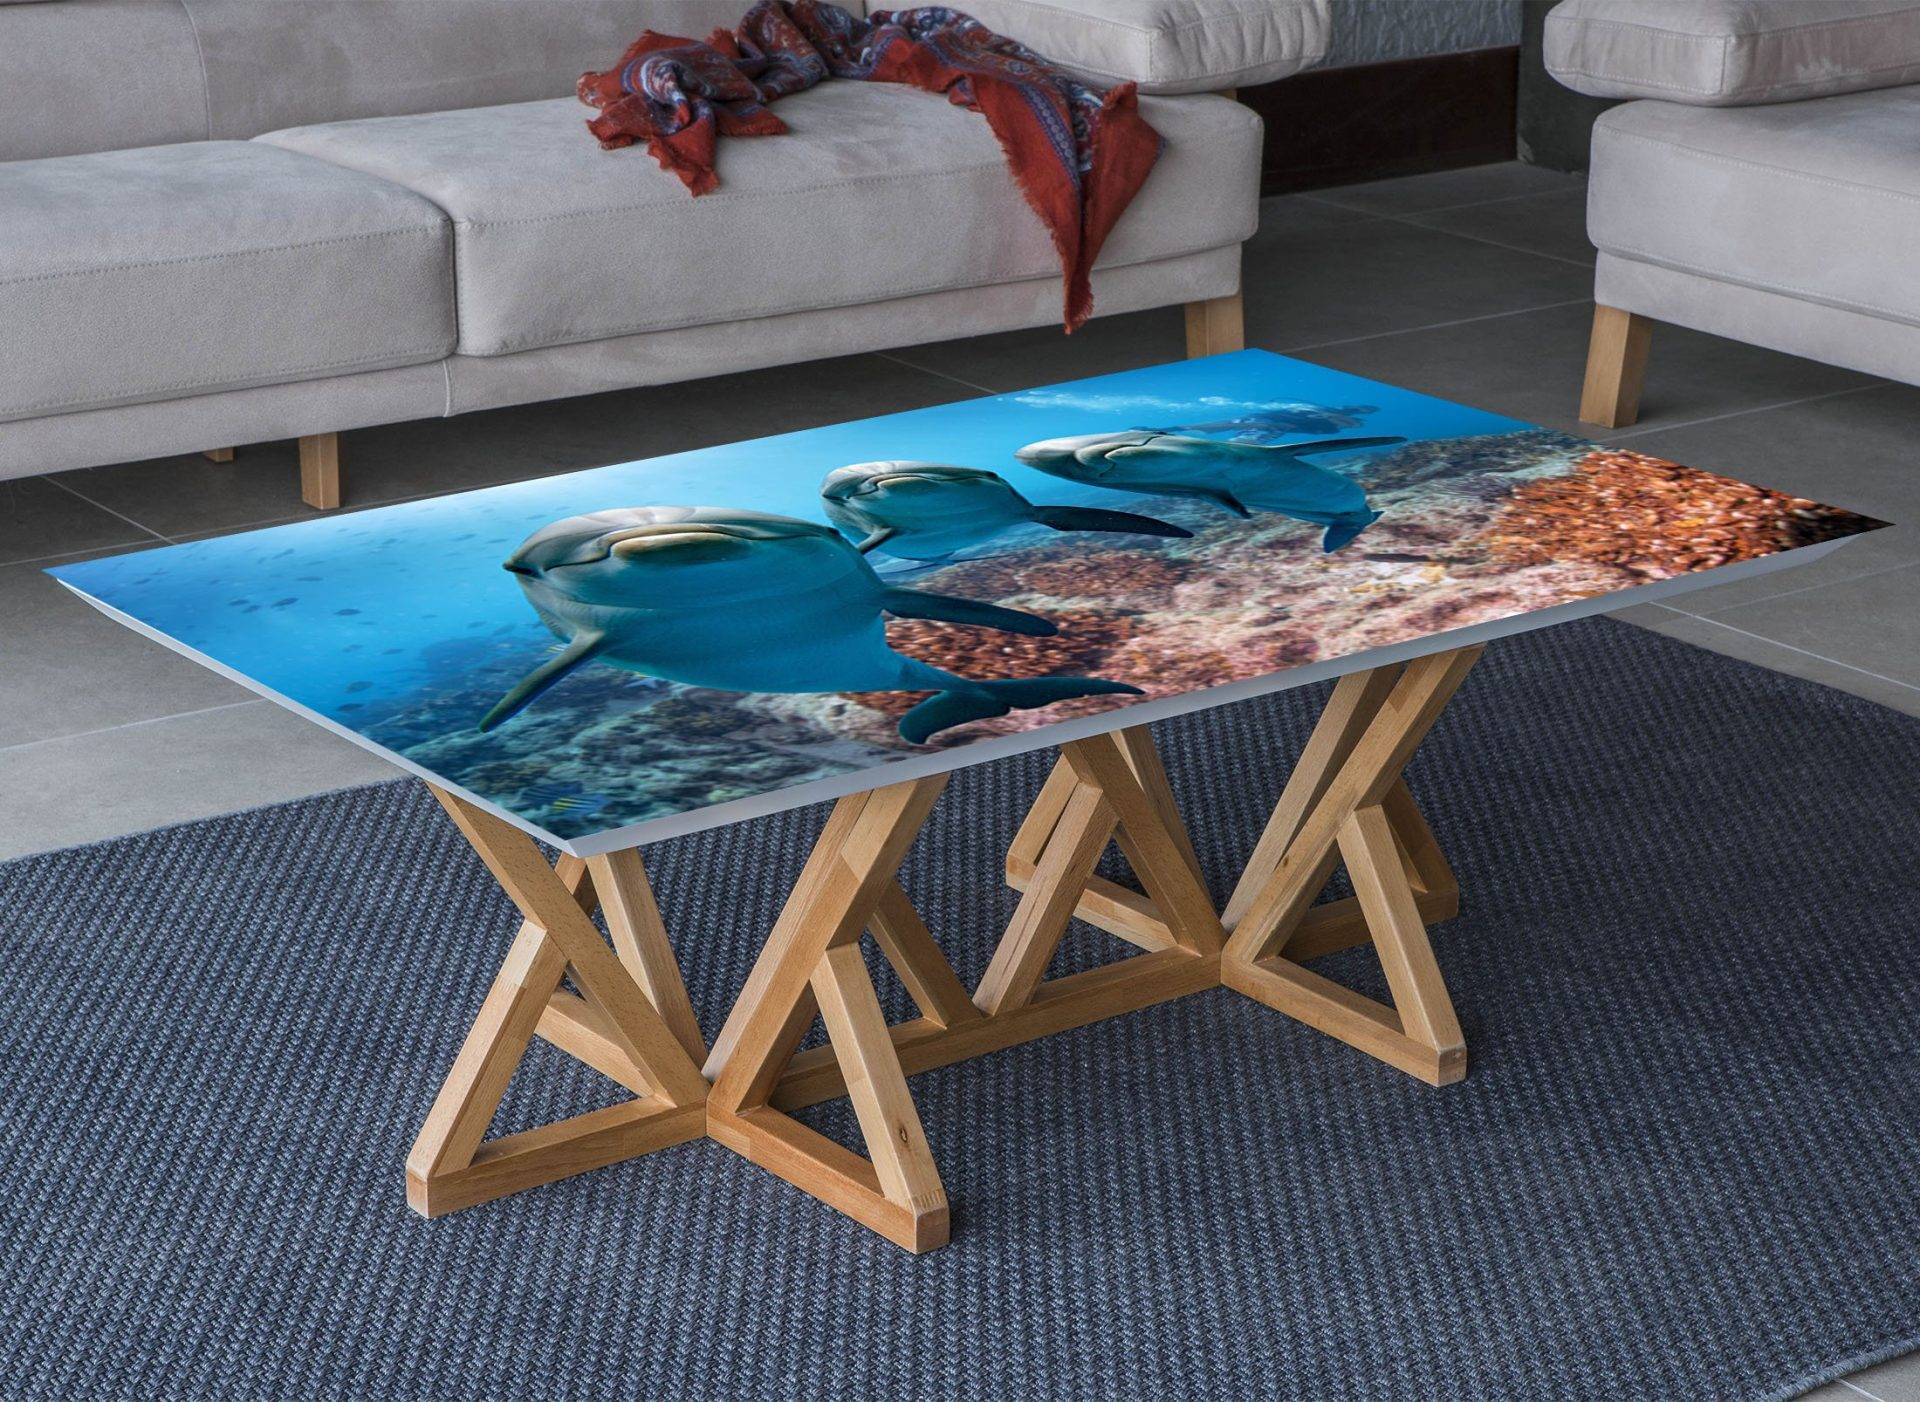 Ocean Dolphins Diver Laminated Vinyl Cover Self-Adhesive for Desk and Tables